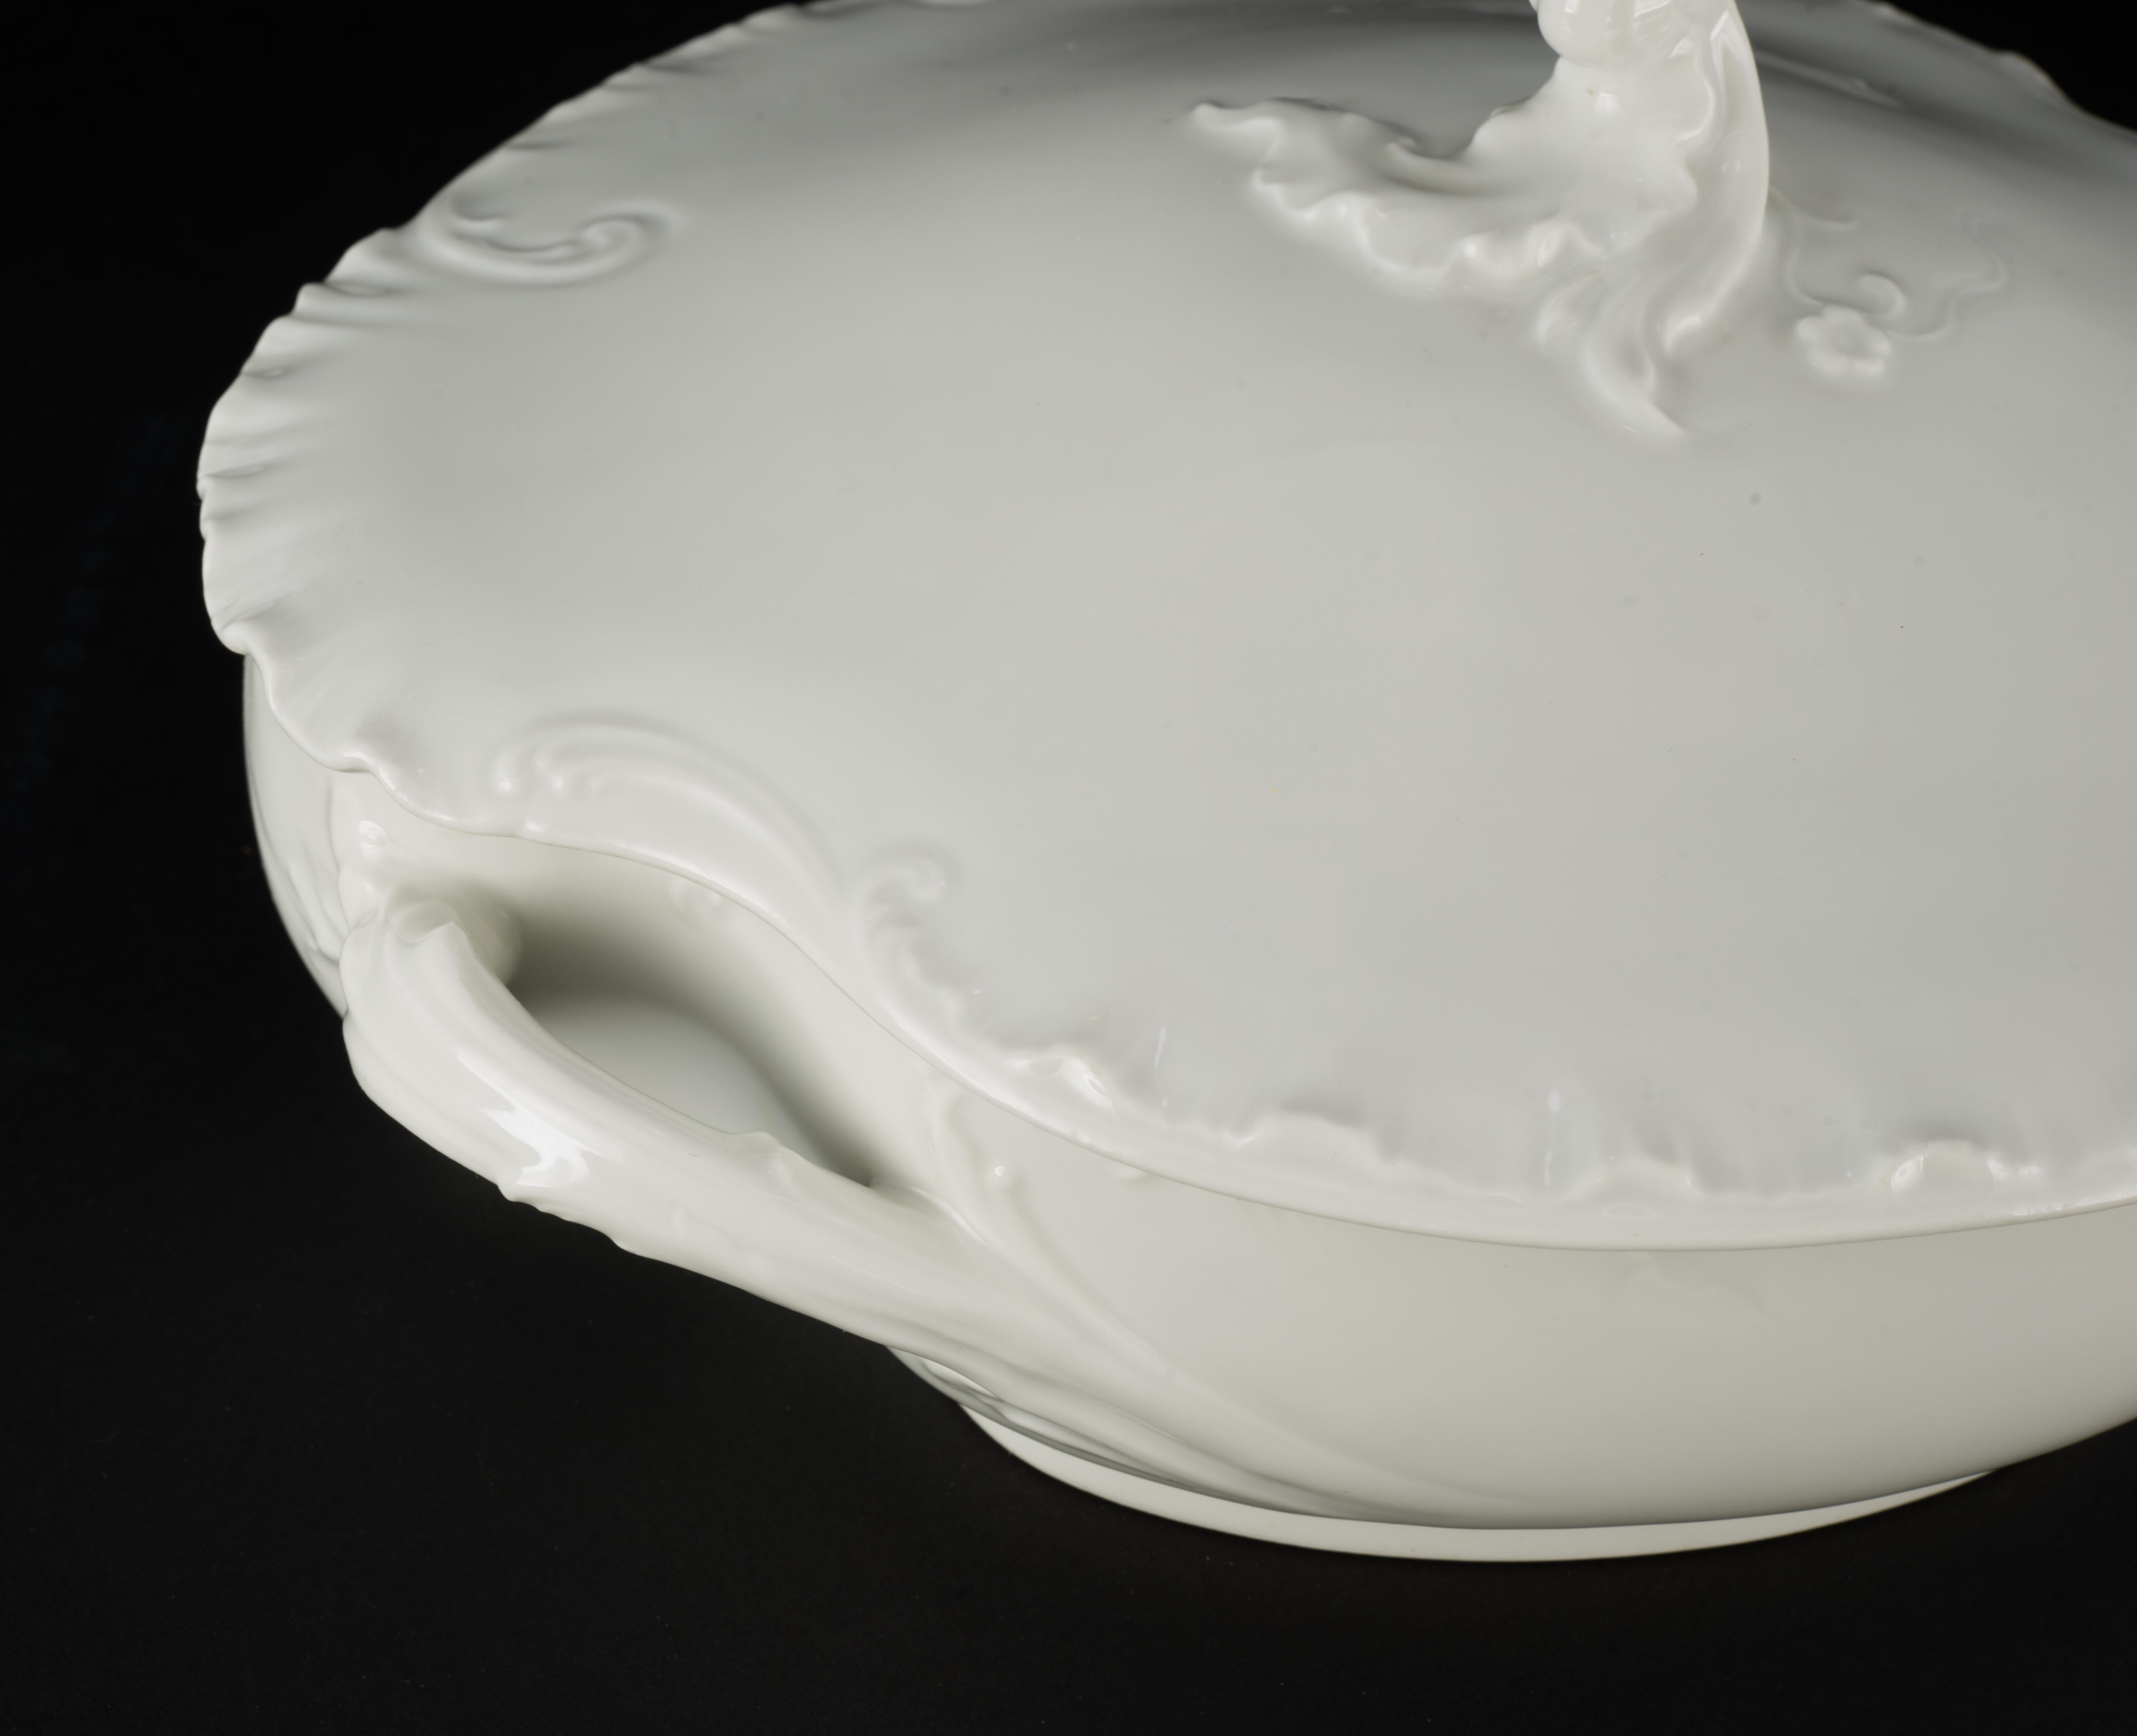 Haviland Limoges Oval Marseille Bowl with Cover, White Porcelain, 1894-1931 For Sale 2